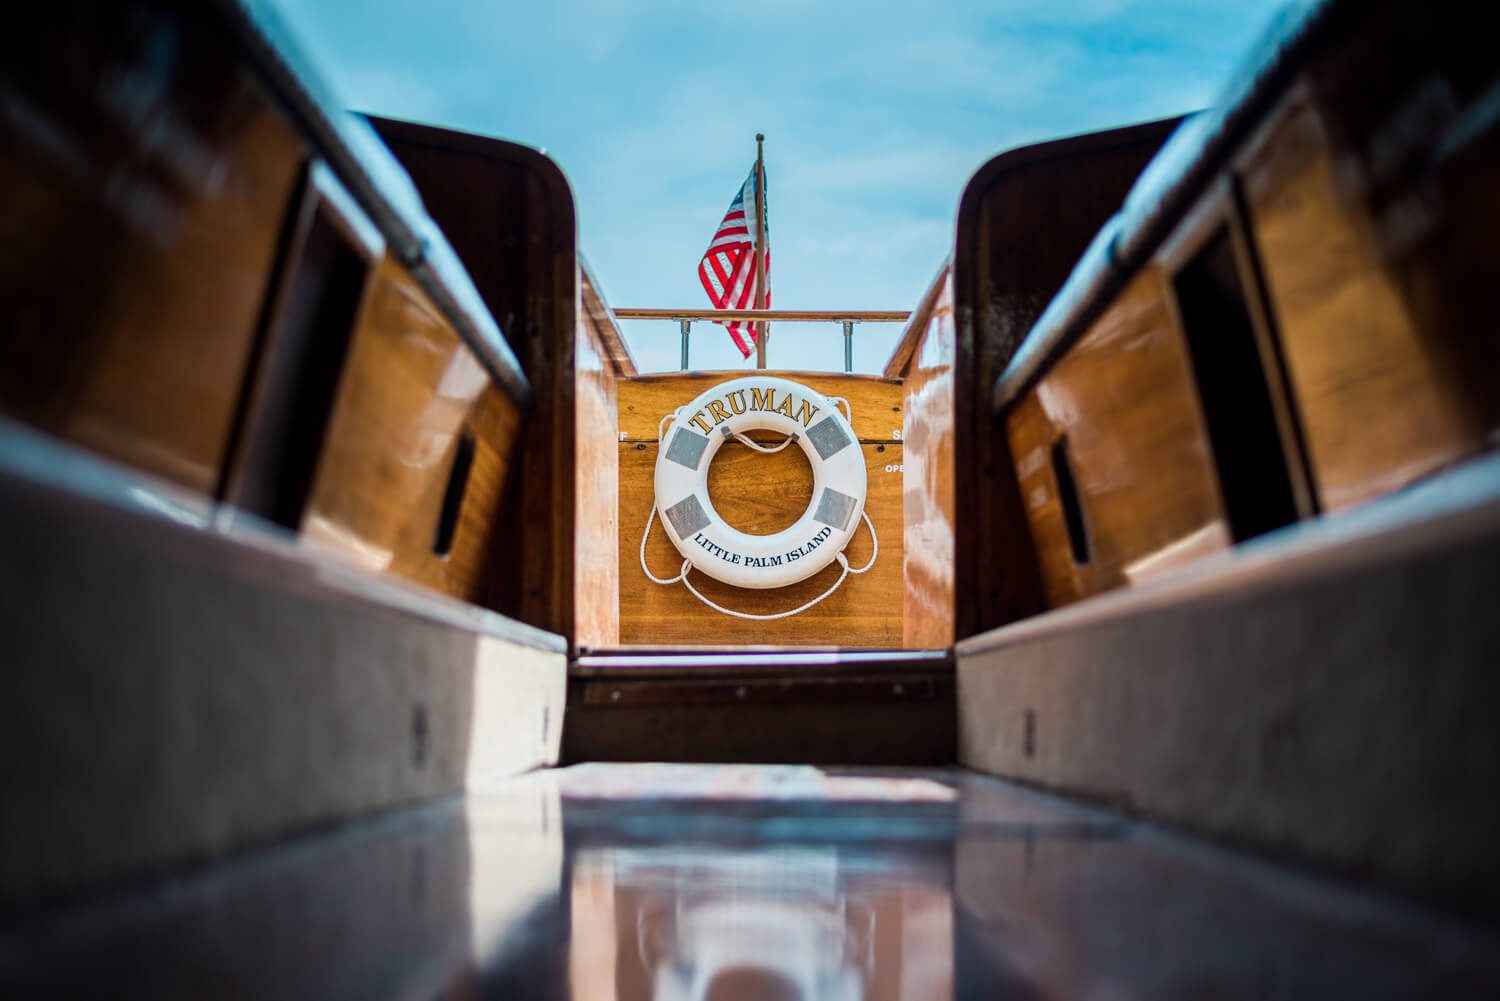 A wooden boat with an American flag on it, captured by a Florida Keys wedding photographer during a Little Palm Island wedding.